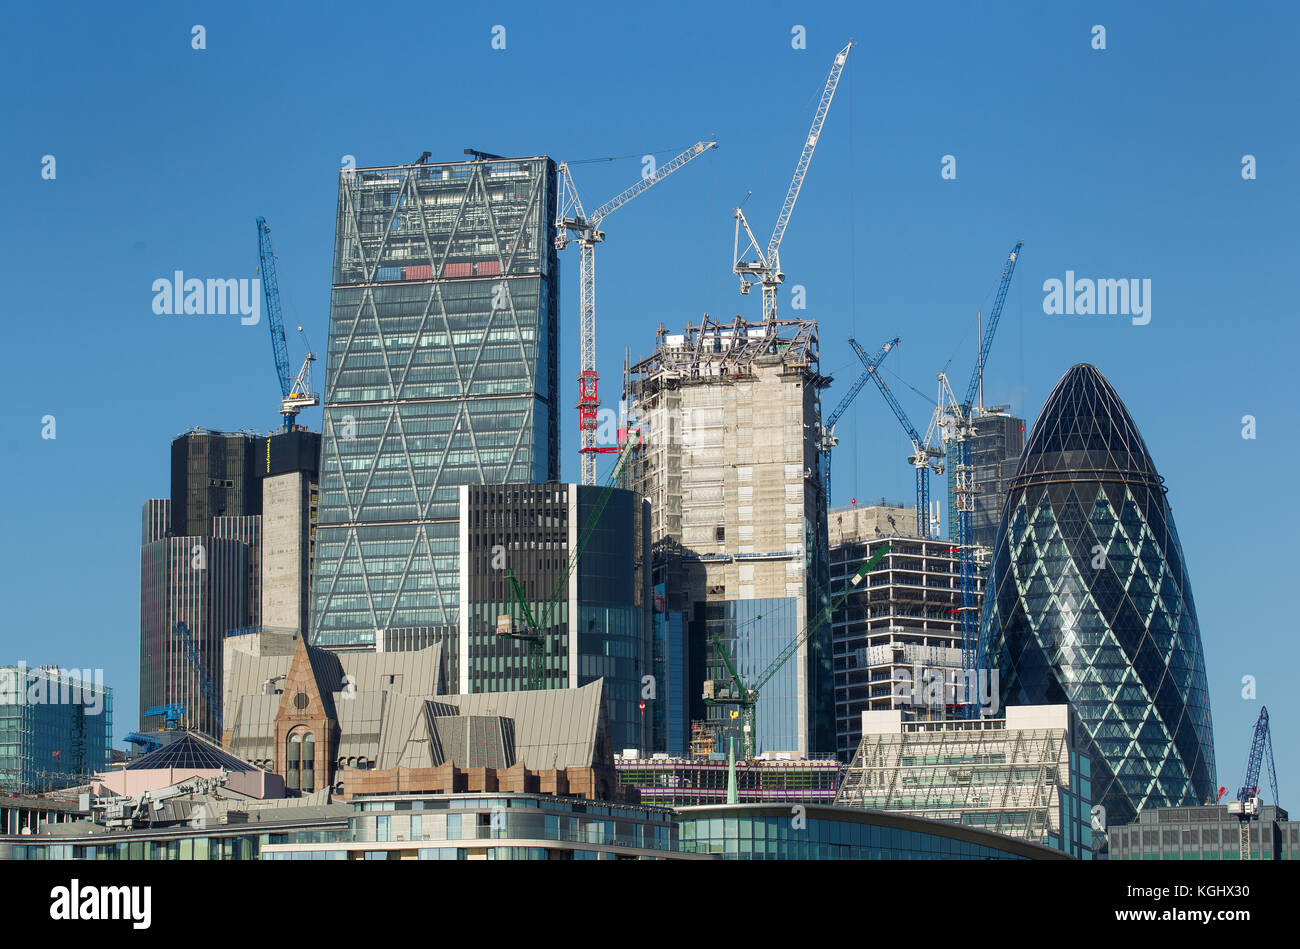 London city skyline seen from the river thames as cranes work on new buildings in the square mile Stock Photo